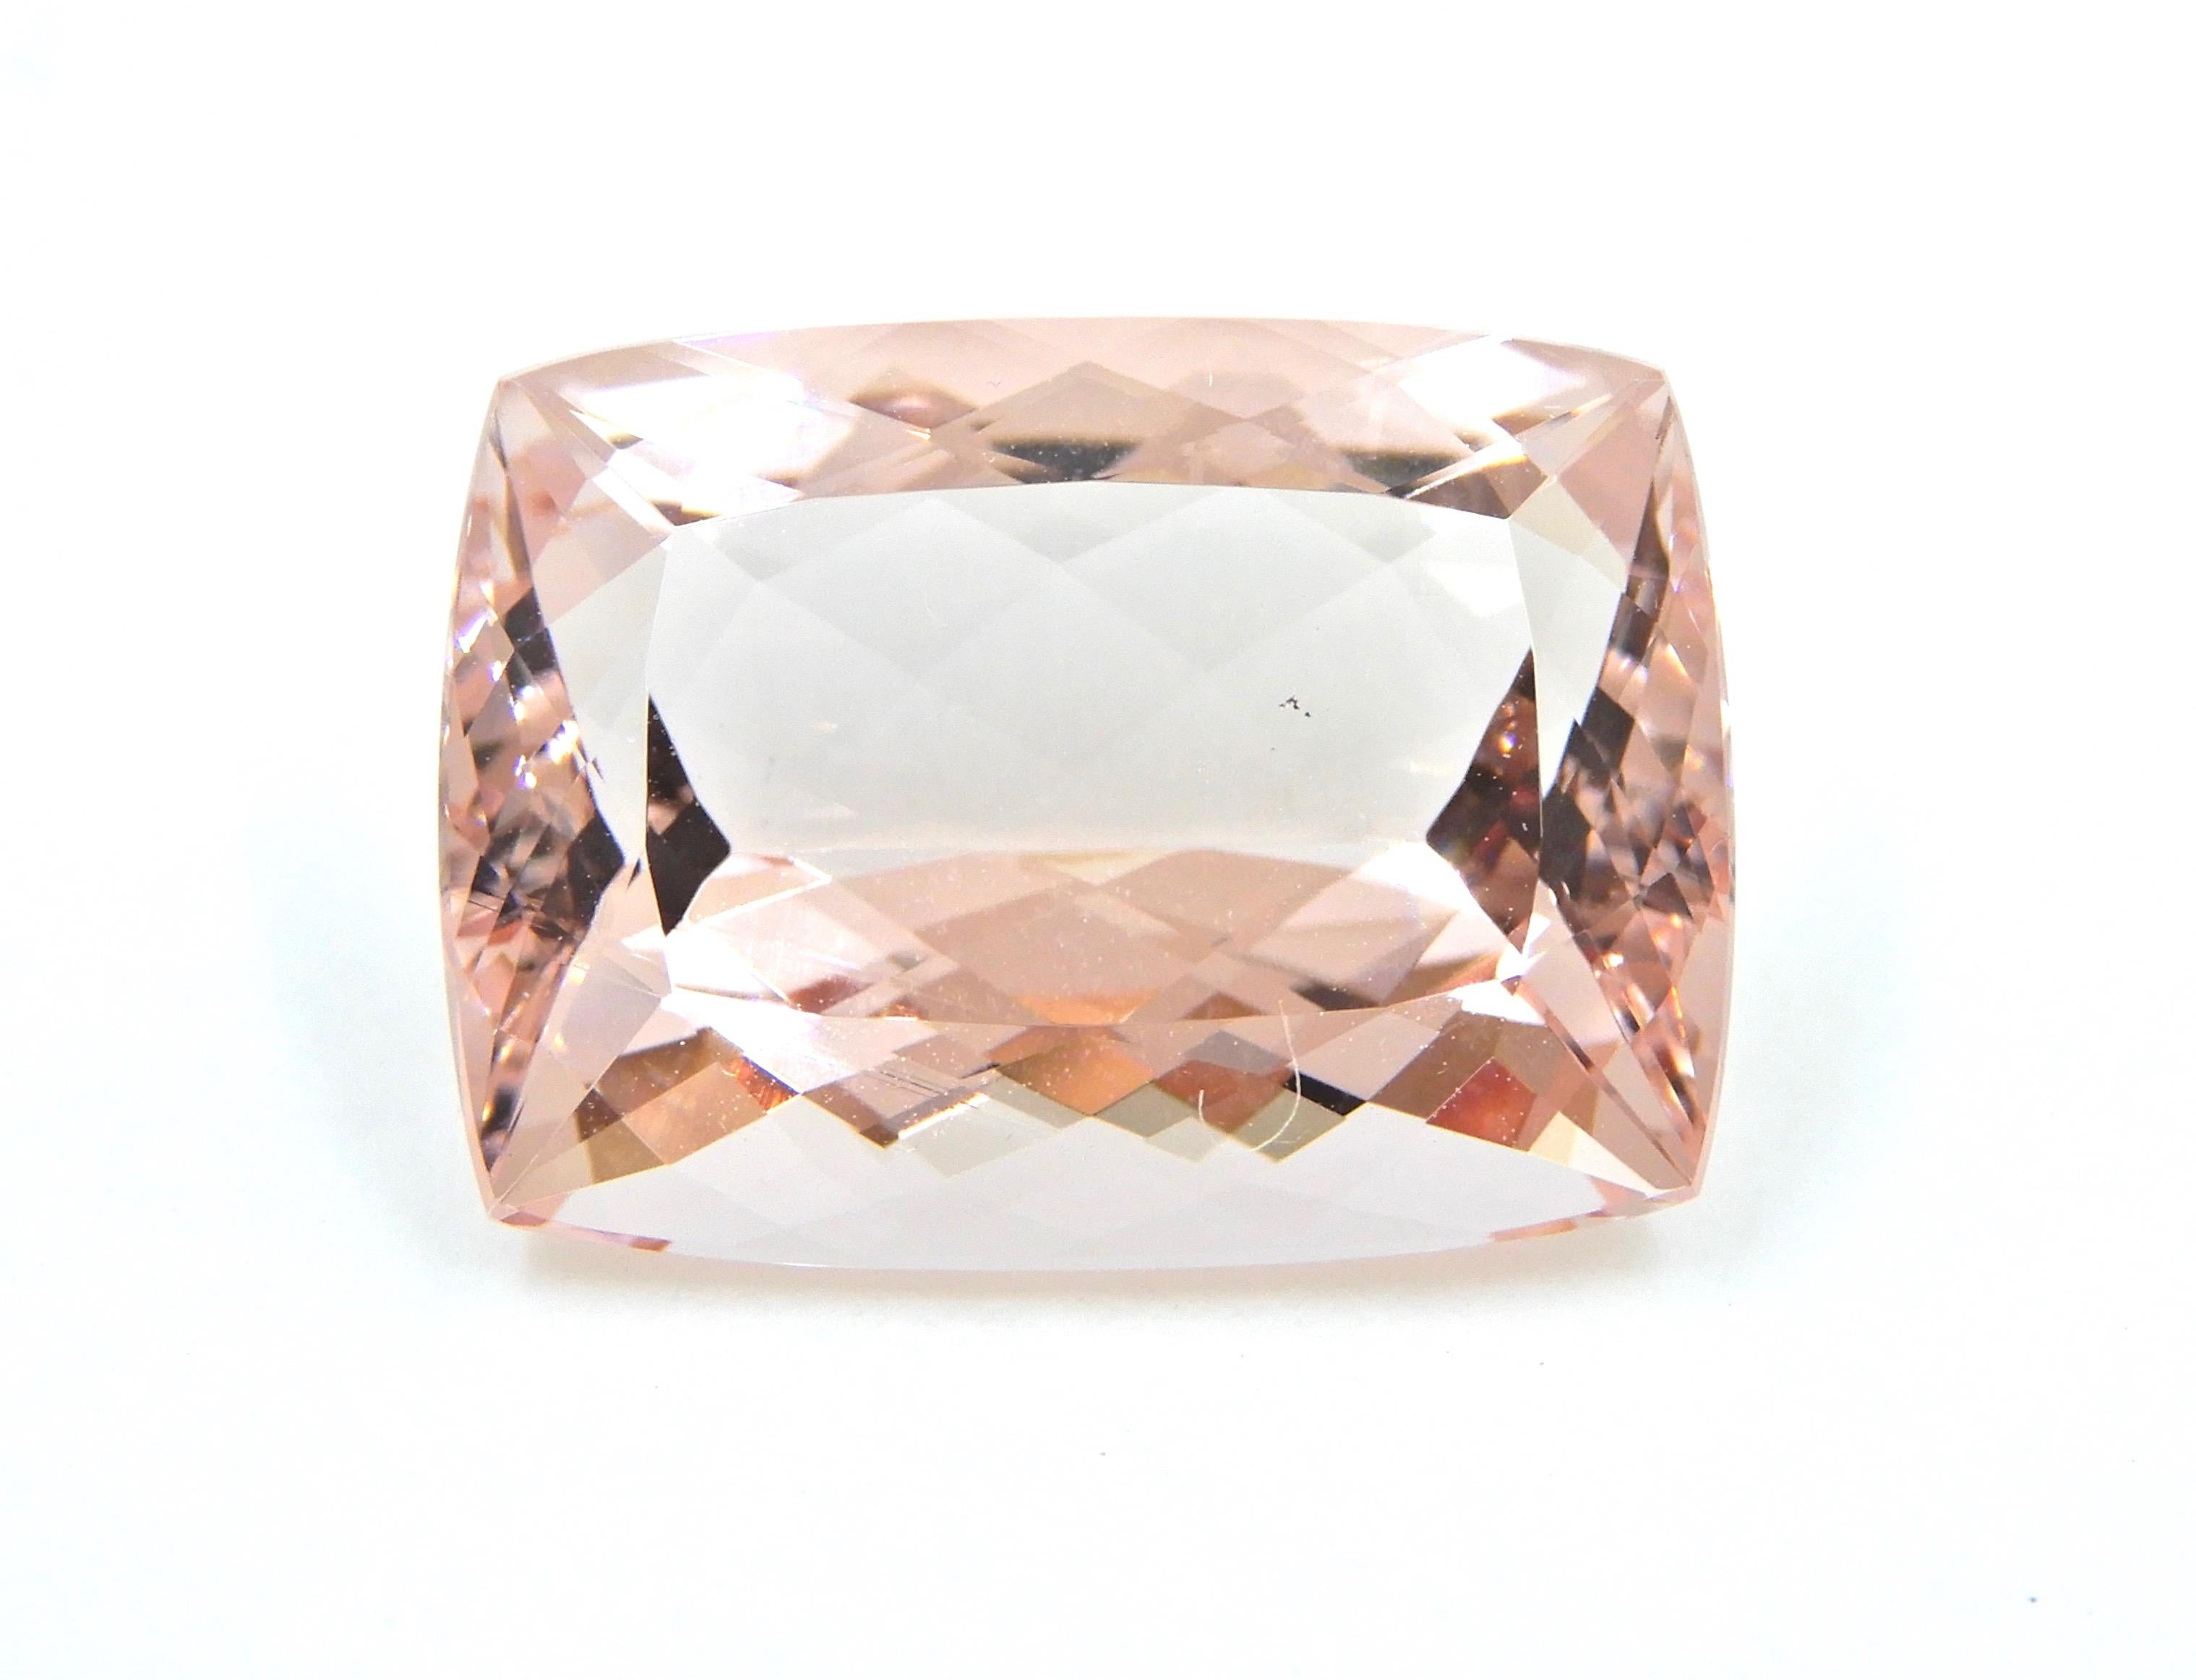 Look no further than this amazing 22.46 Carat Cushion Cut Morganite Loose Gemstone for the start of your dream ring, pendant, brooch or any jewellery your heart desires.

This cushion cut is everything and the photos can't do it justice.  
20.5mm x